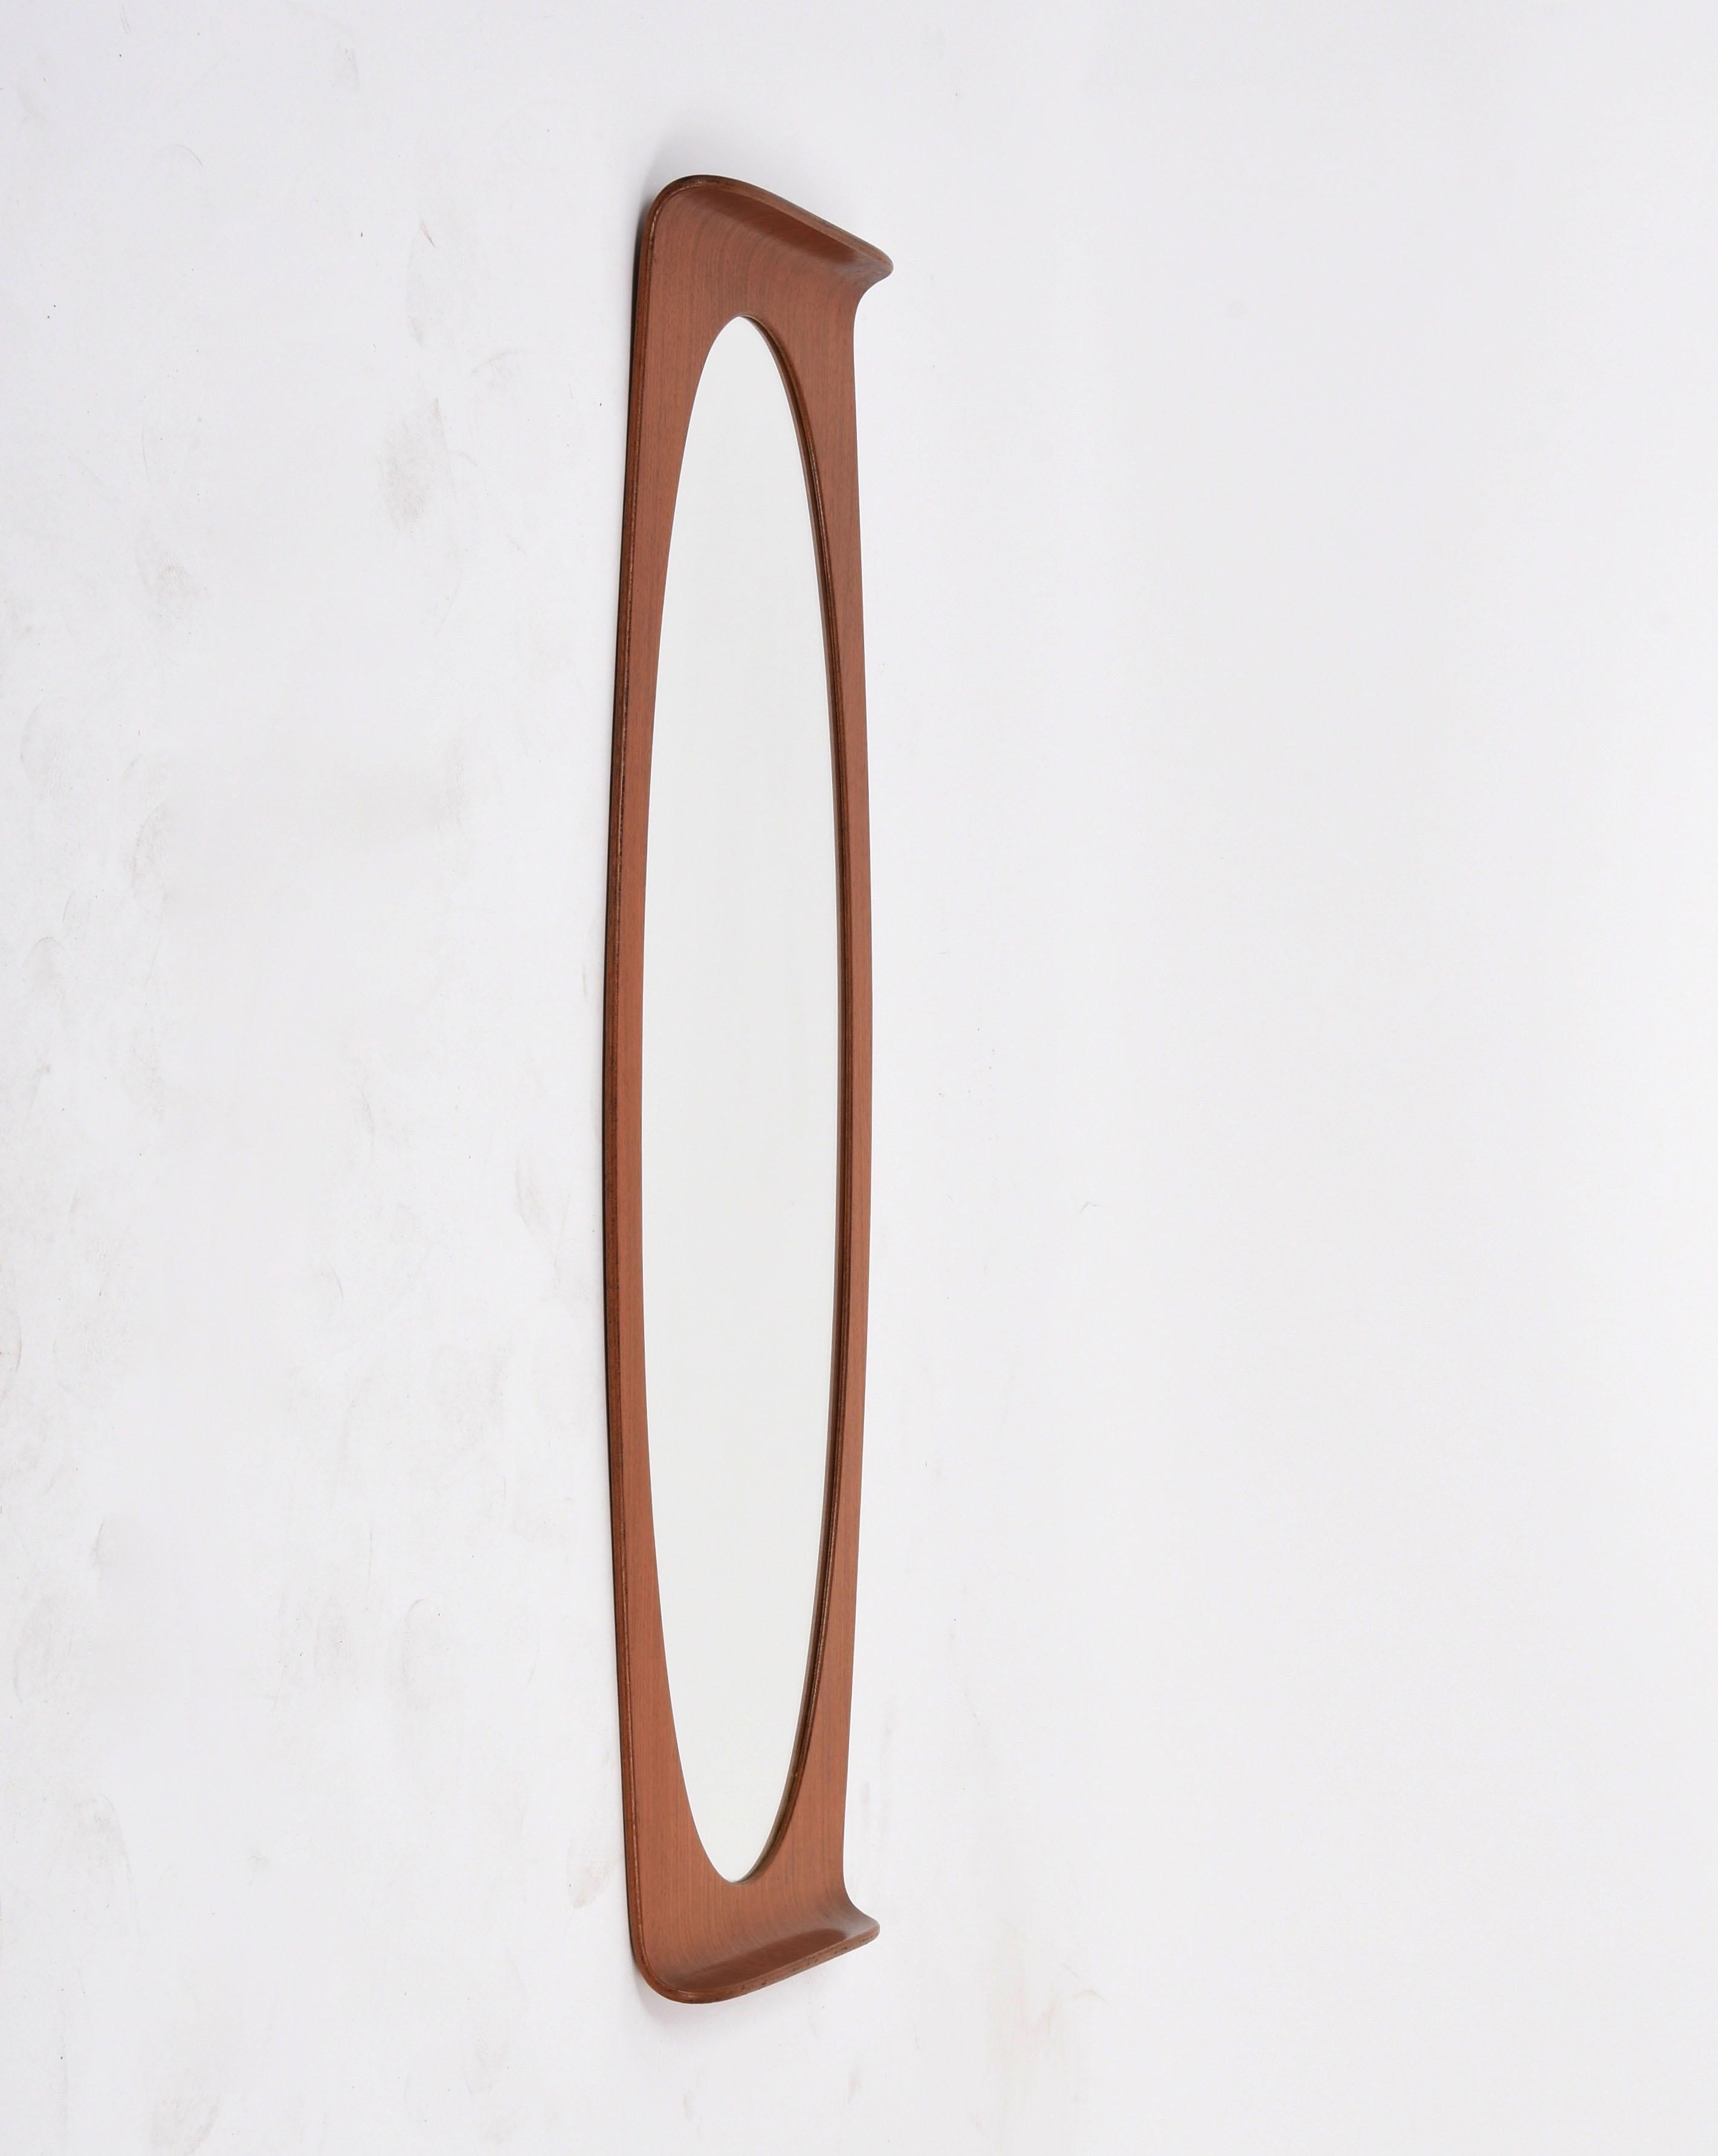 Amazing mid-century curved wood elliptical wall mirror. This fantastic piece was designed by Franco Campo and Carlo Graffi in Italy during the 1960s.

This great item is wonderful because of its lines, like the elliptic mirror while the wooden